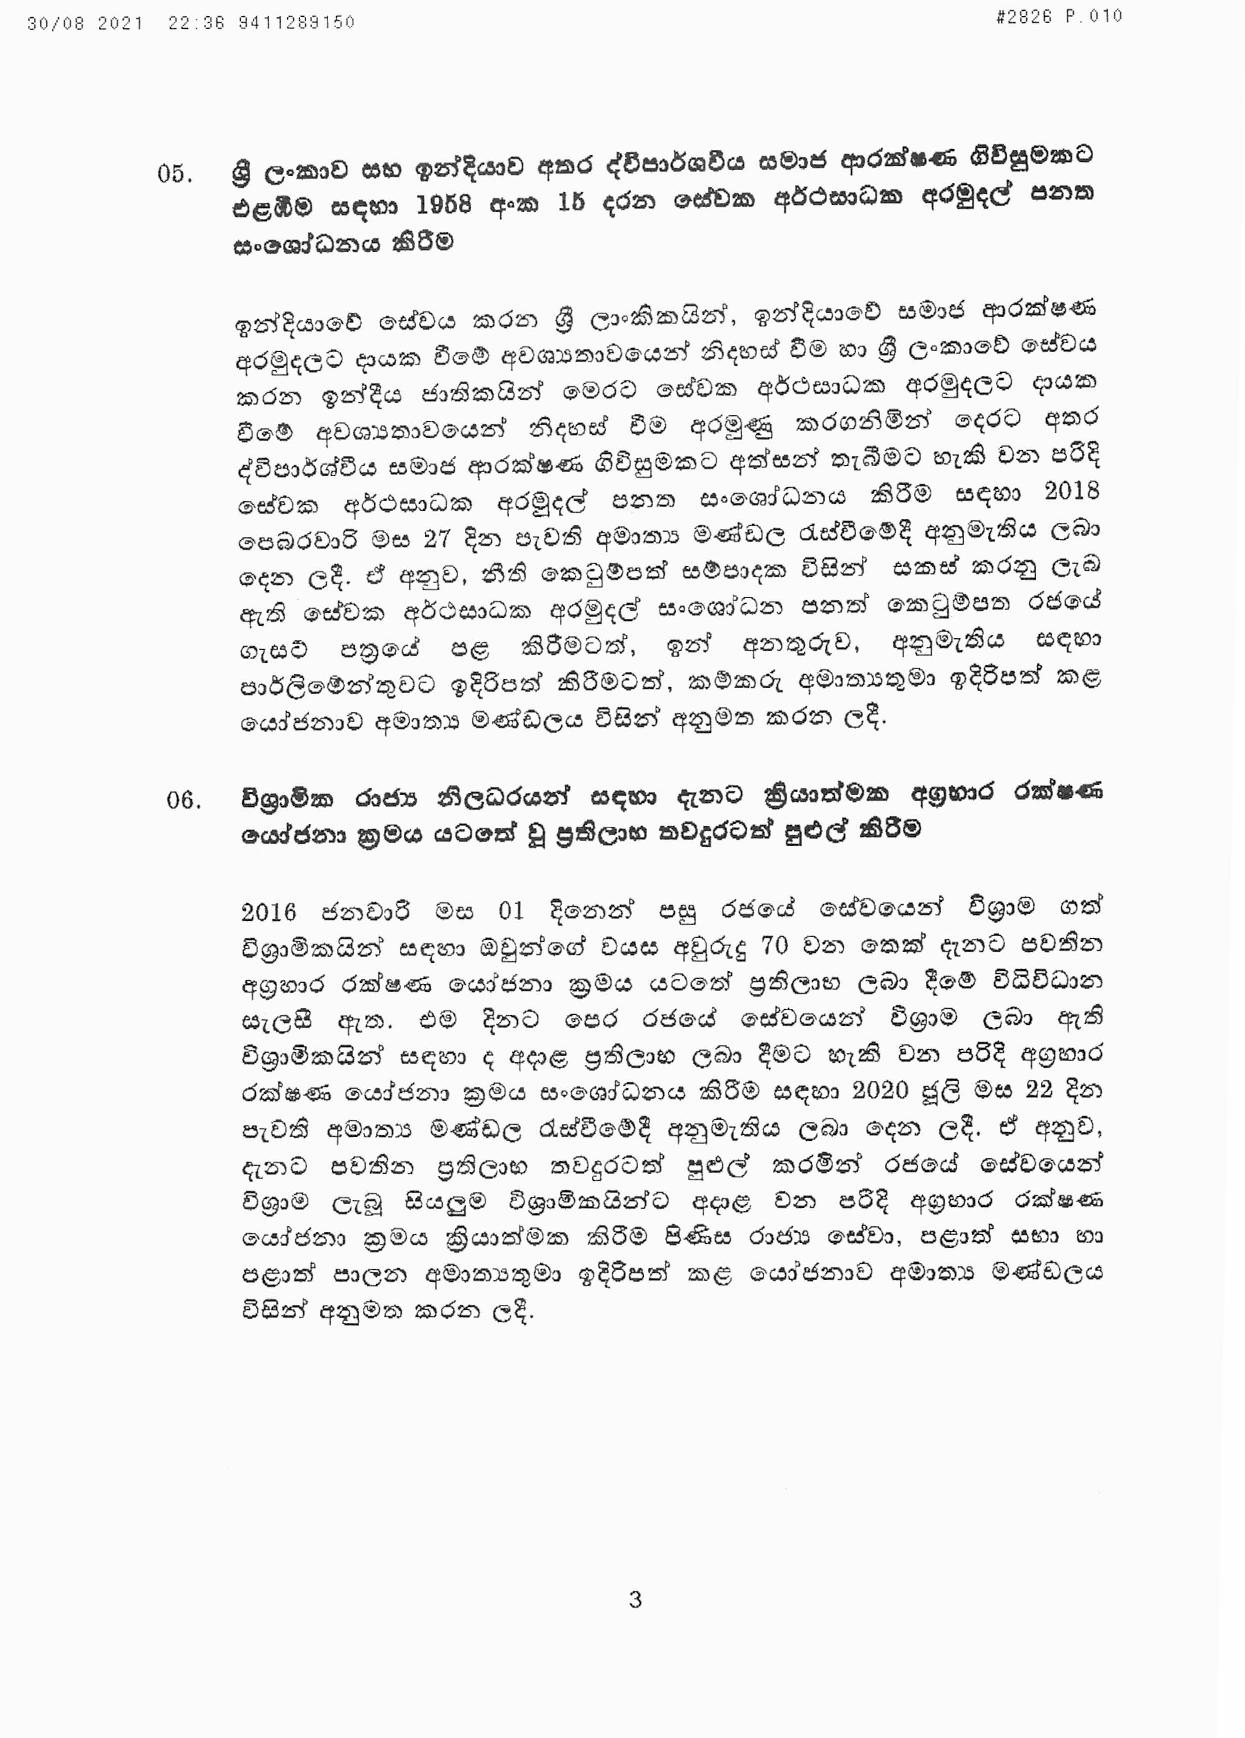 Cabinet Decision on 30.08.2021 Sinhala page 001